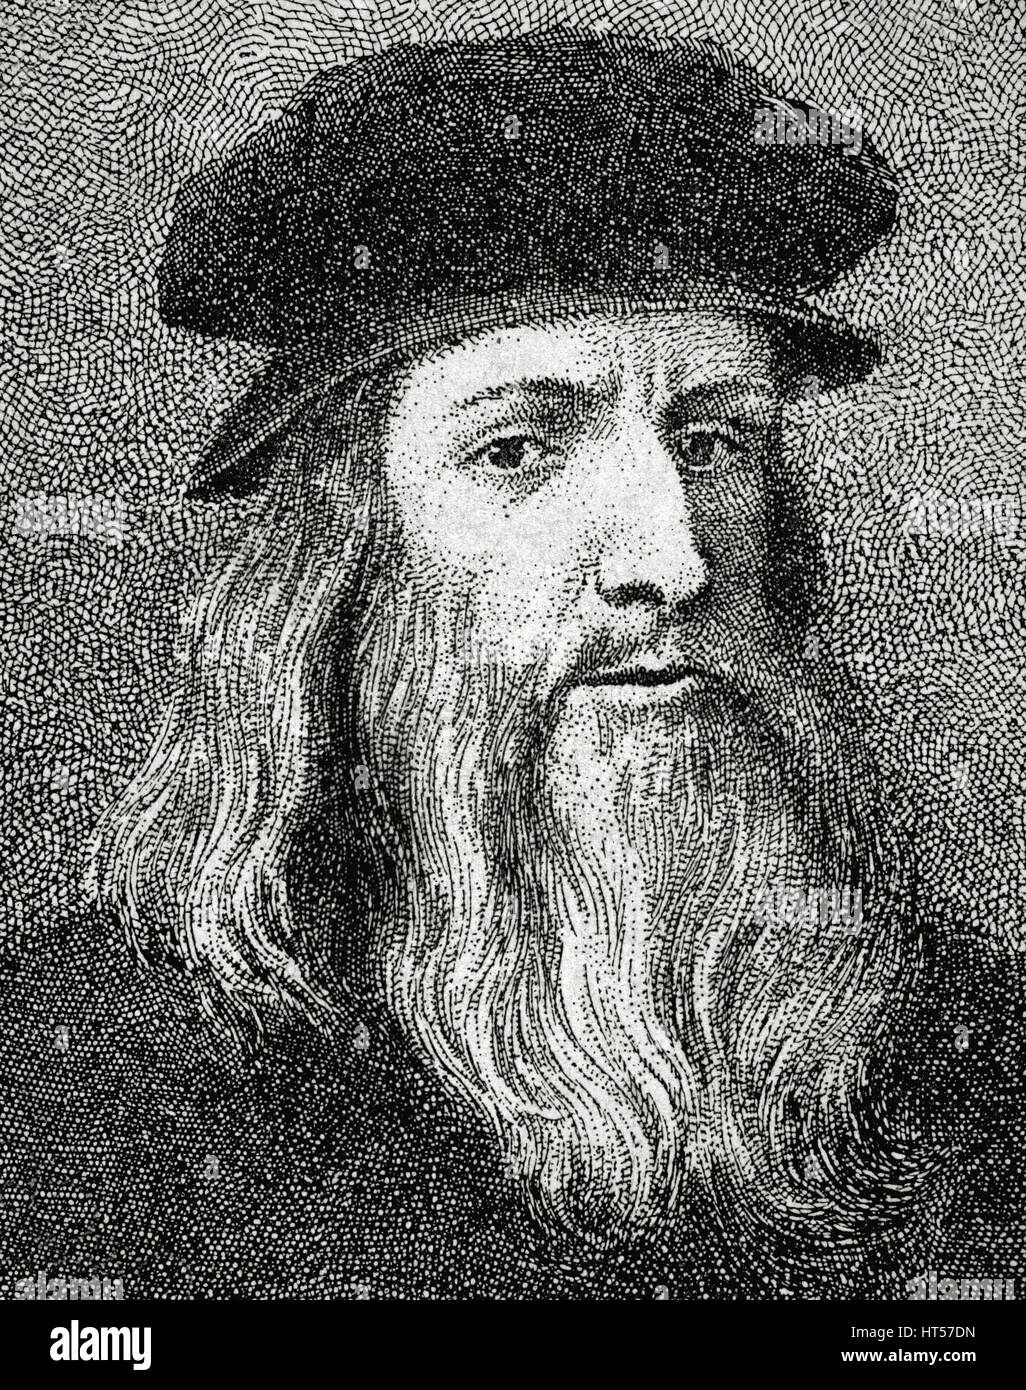 Leonardo da Vinci (1452-1519). Italian polymath known for his works in invention, painting, sculpting, architecture, science, music, mathematics, engineering, literature, anatomy, geology, astronomy, botany, writing, history, and cartography. Renaissance era. Portrait. Engraving by J. Dieguez. 'La Ilustración Artística', 1896. Stock Photo